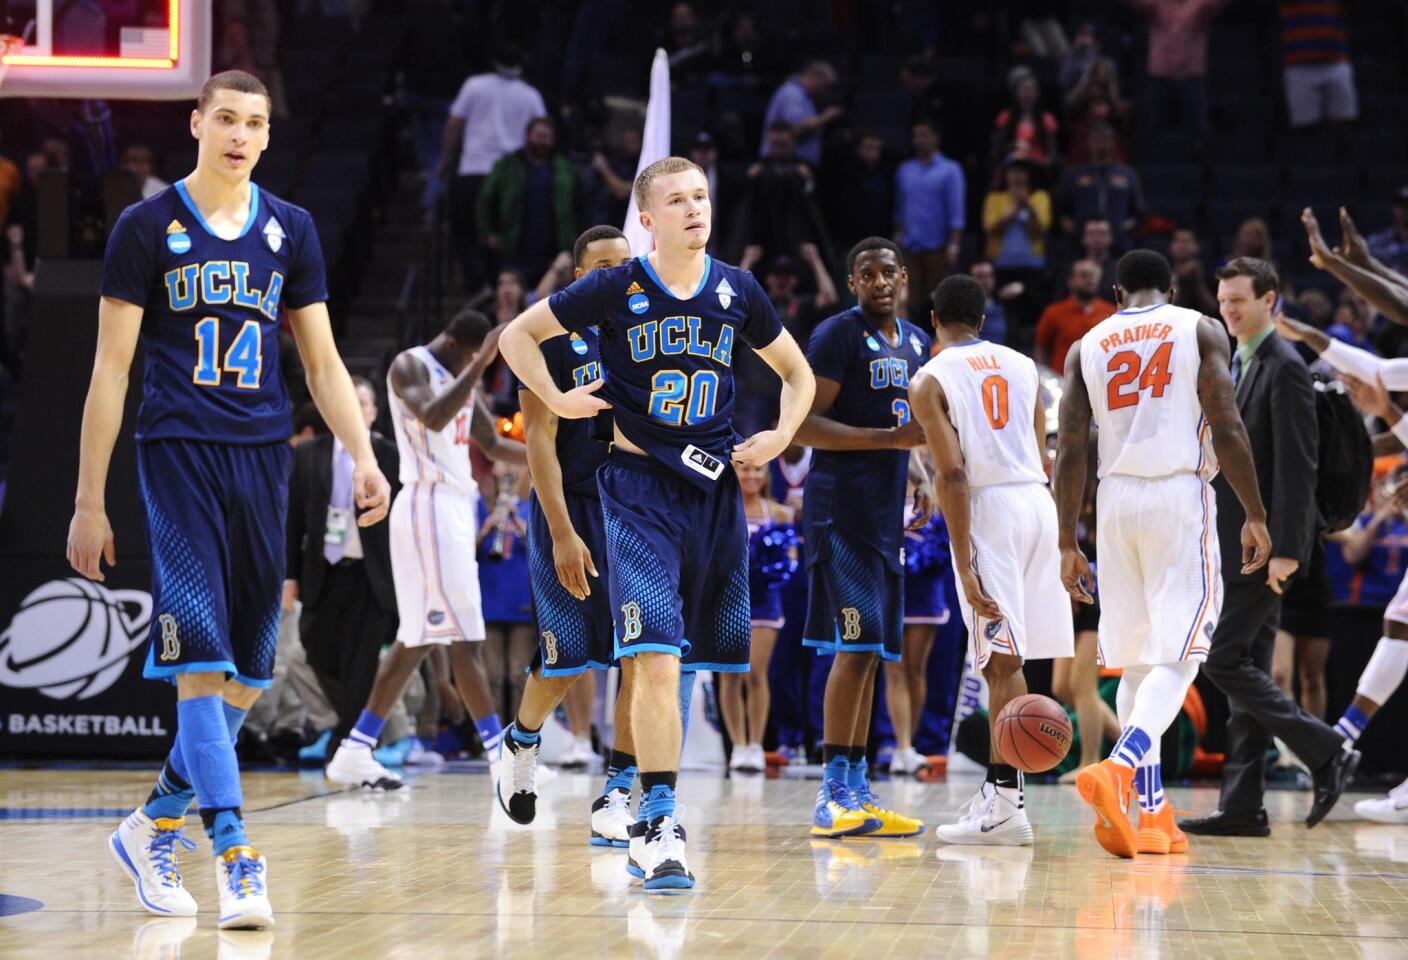 UCLA guards Zach LaVine (14), Bryce Alford (20) and Jordan Adams (3) leave the court as Florida players begin to celebrate after defeating the Bruins, 79-68, in the NCAA tournament South Regional semifinal on Thursday night in Memphis, Tenn.